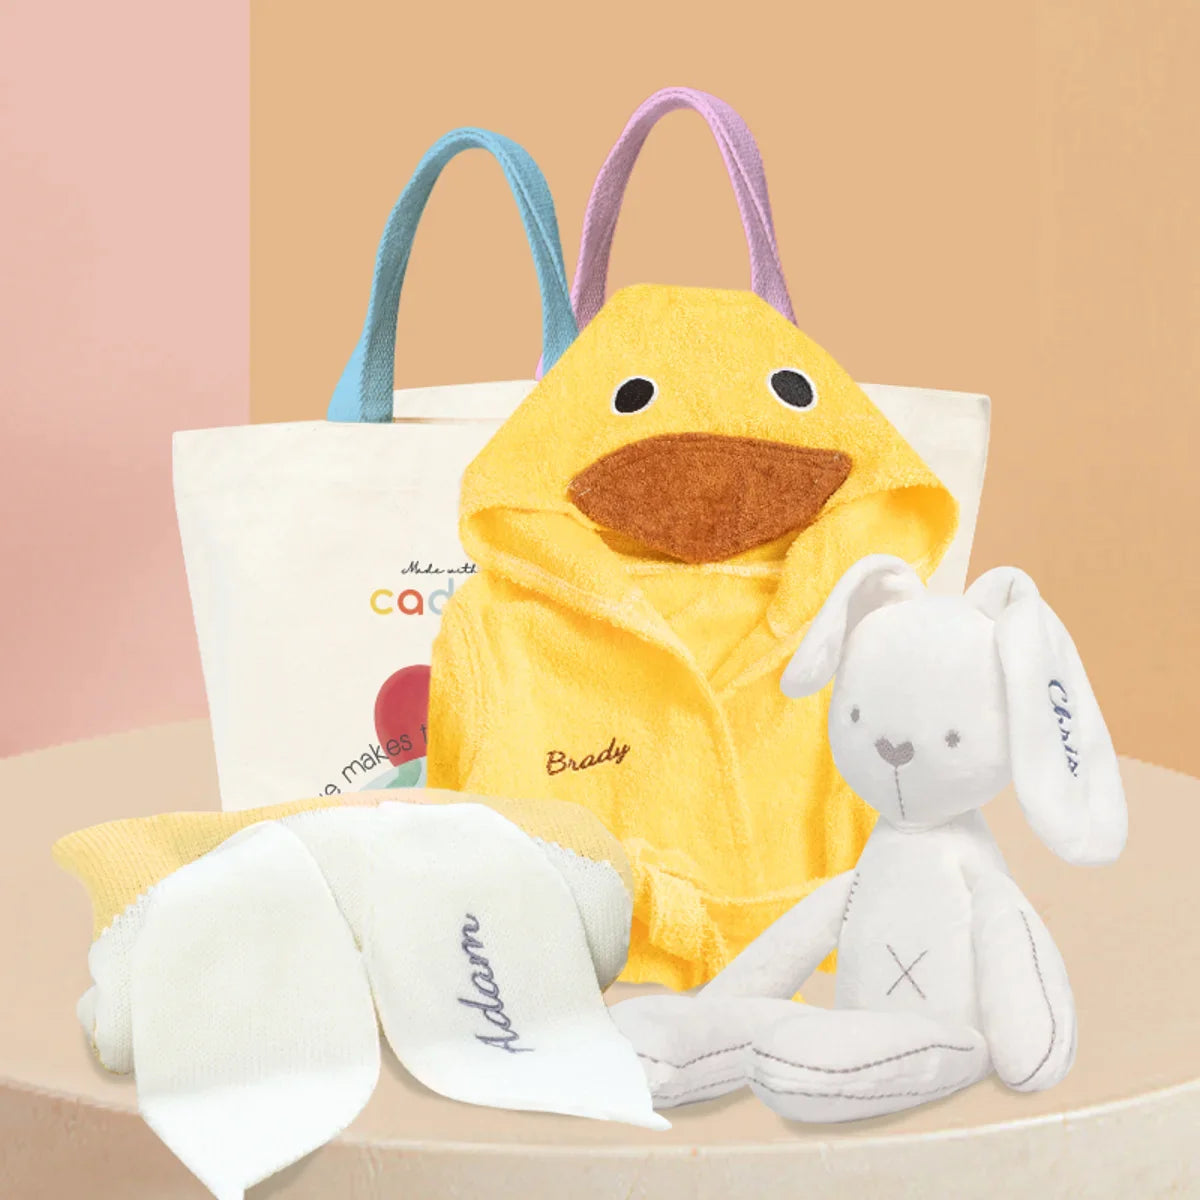 Baby Hamper - Duck Adventure Gift Set: Yellow Duck bathrobe, White bunny plushie, yellow knit blanket with embroidered name on one ear, and Cadeaus brand canvas bag packaging.